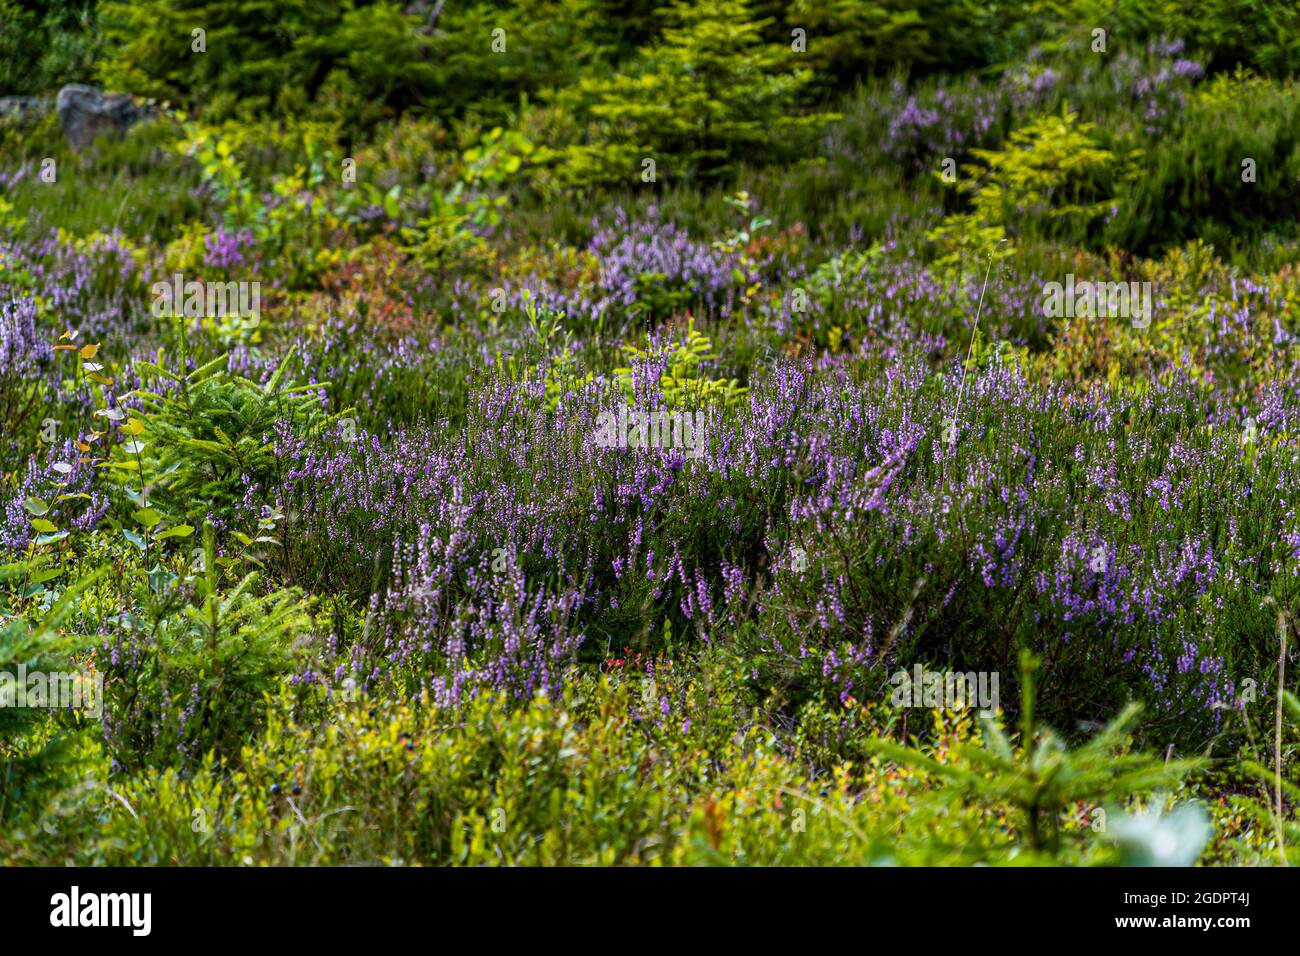 Heather and blueberries near Braunlage, Germany Stock Photo